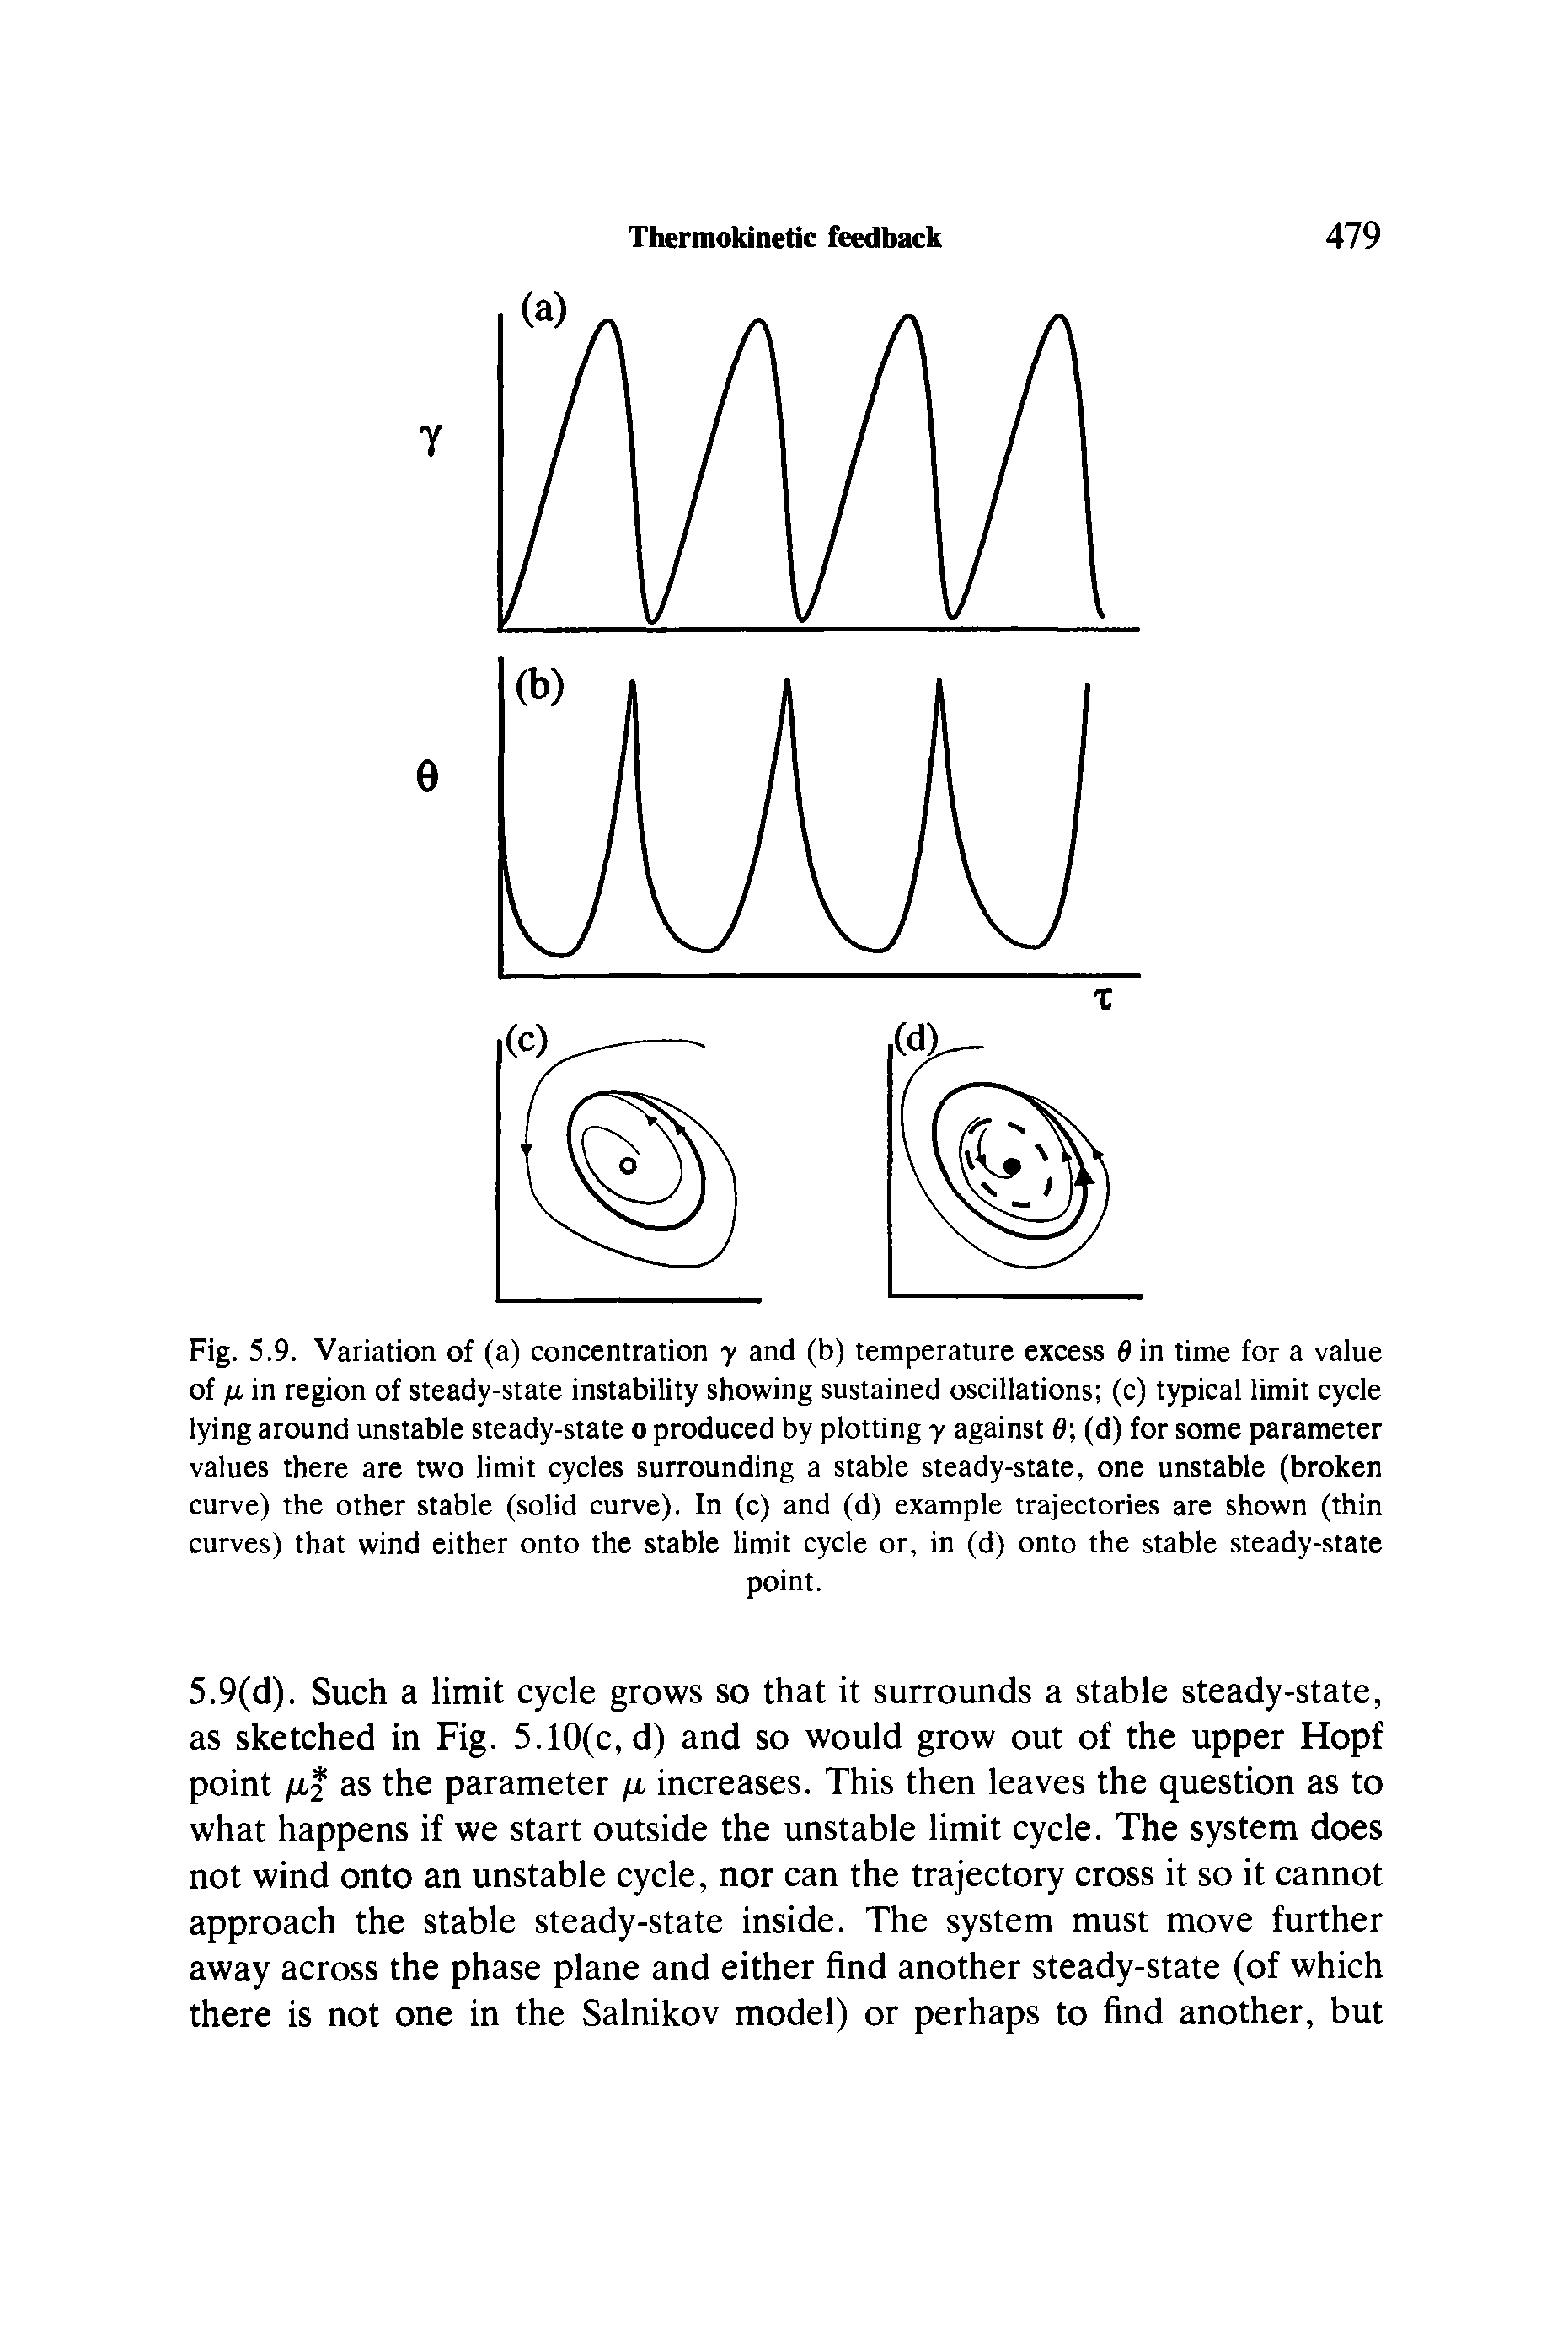 Fig. 5.9. Variation of (a) concentration y and (b) temperature excess 6 in time for a value of in region of steady-state instability showing sustained oscillations (c) typical limit cycle lying around unstable steady-state o produced by plotting y against (d) for some parameter values there are two limit cycles surrounding a stable steady-state, one unstable (broken curve) the other stable (solid curve). In (c) and (d) example trajectories are shown (thin curves) that wind either onto the stable limit cycle or, in (d) onto the stable steady-state...